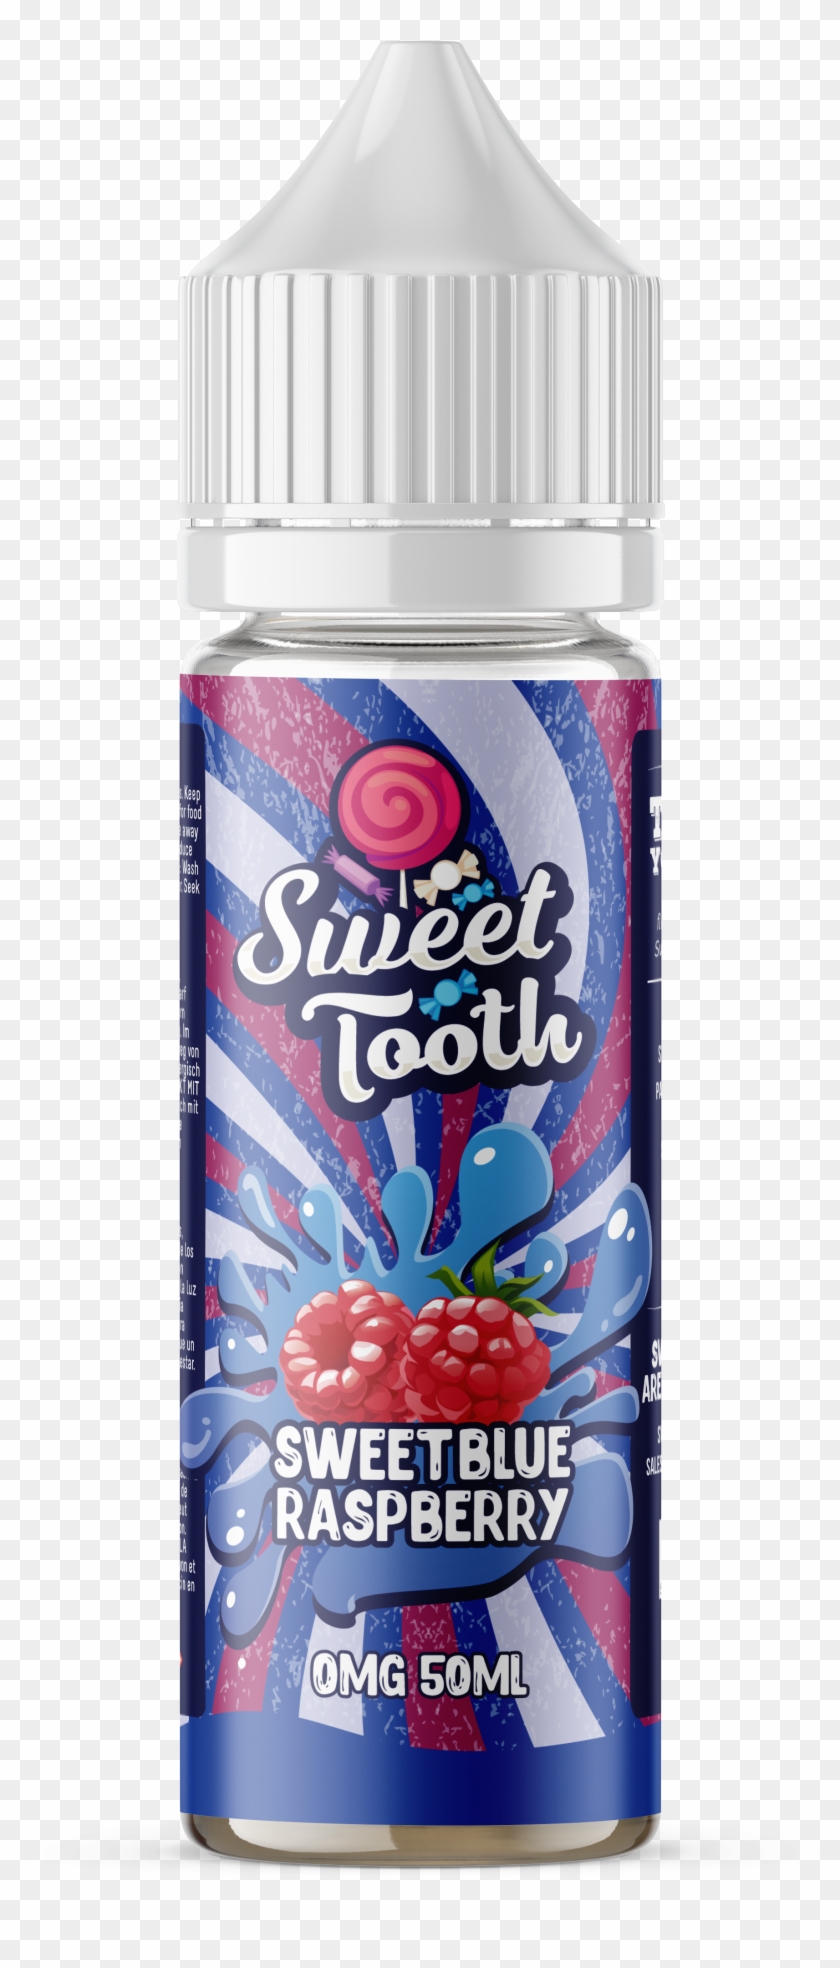 Sweet Tooth E Liquid - Composition Of Electronic Cigarette Aerosol Clipart #4808832